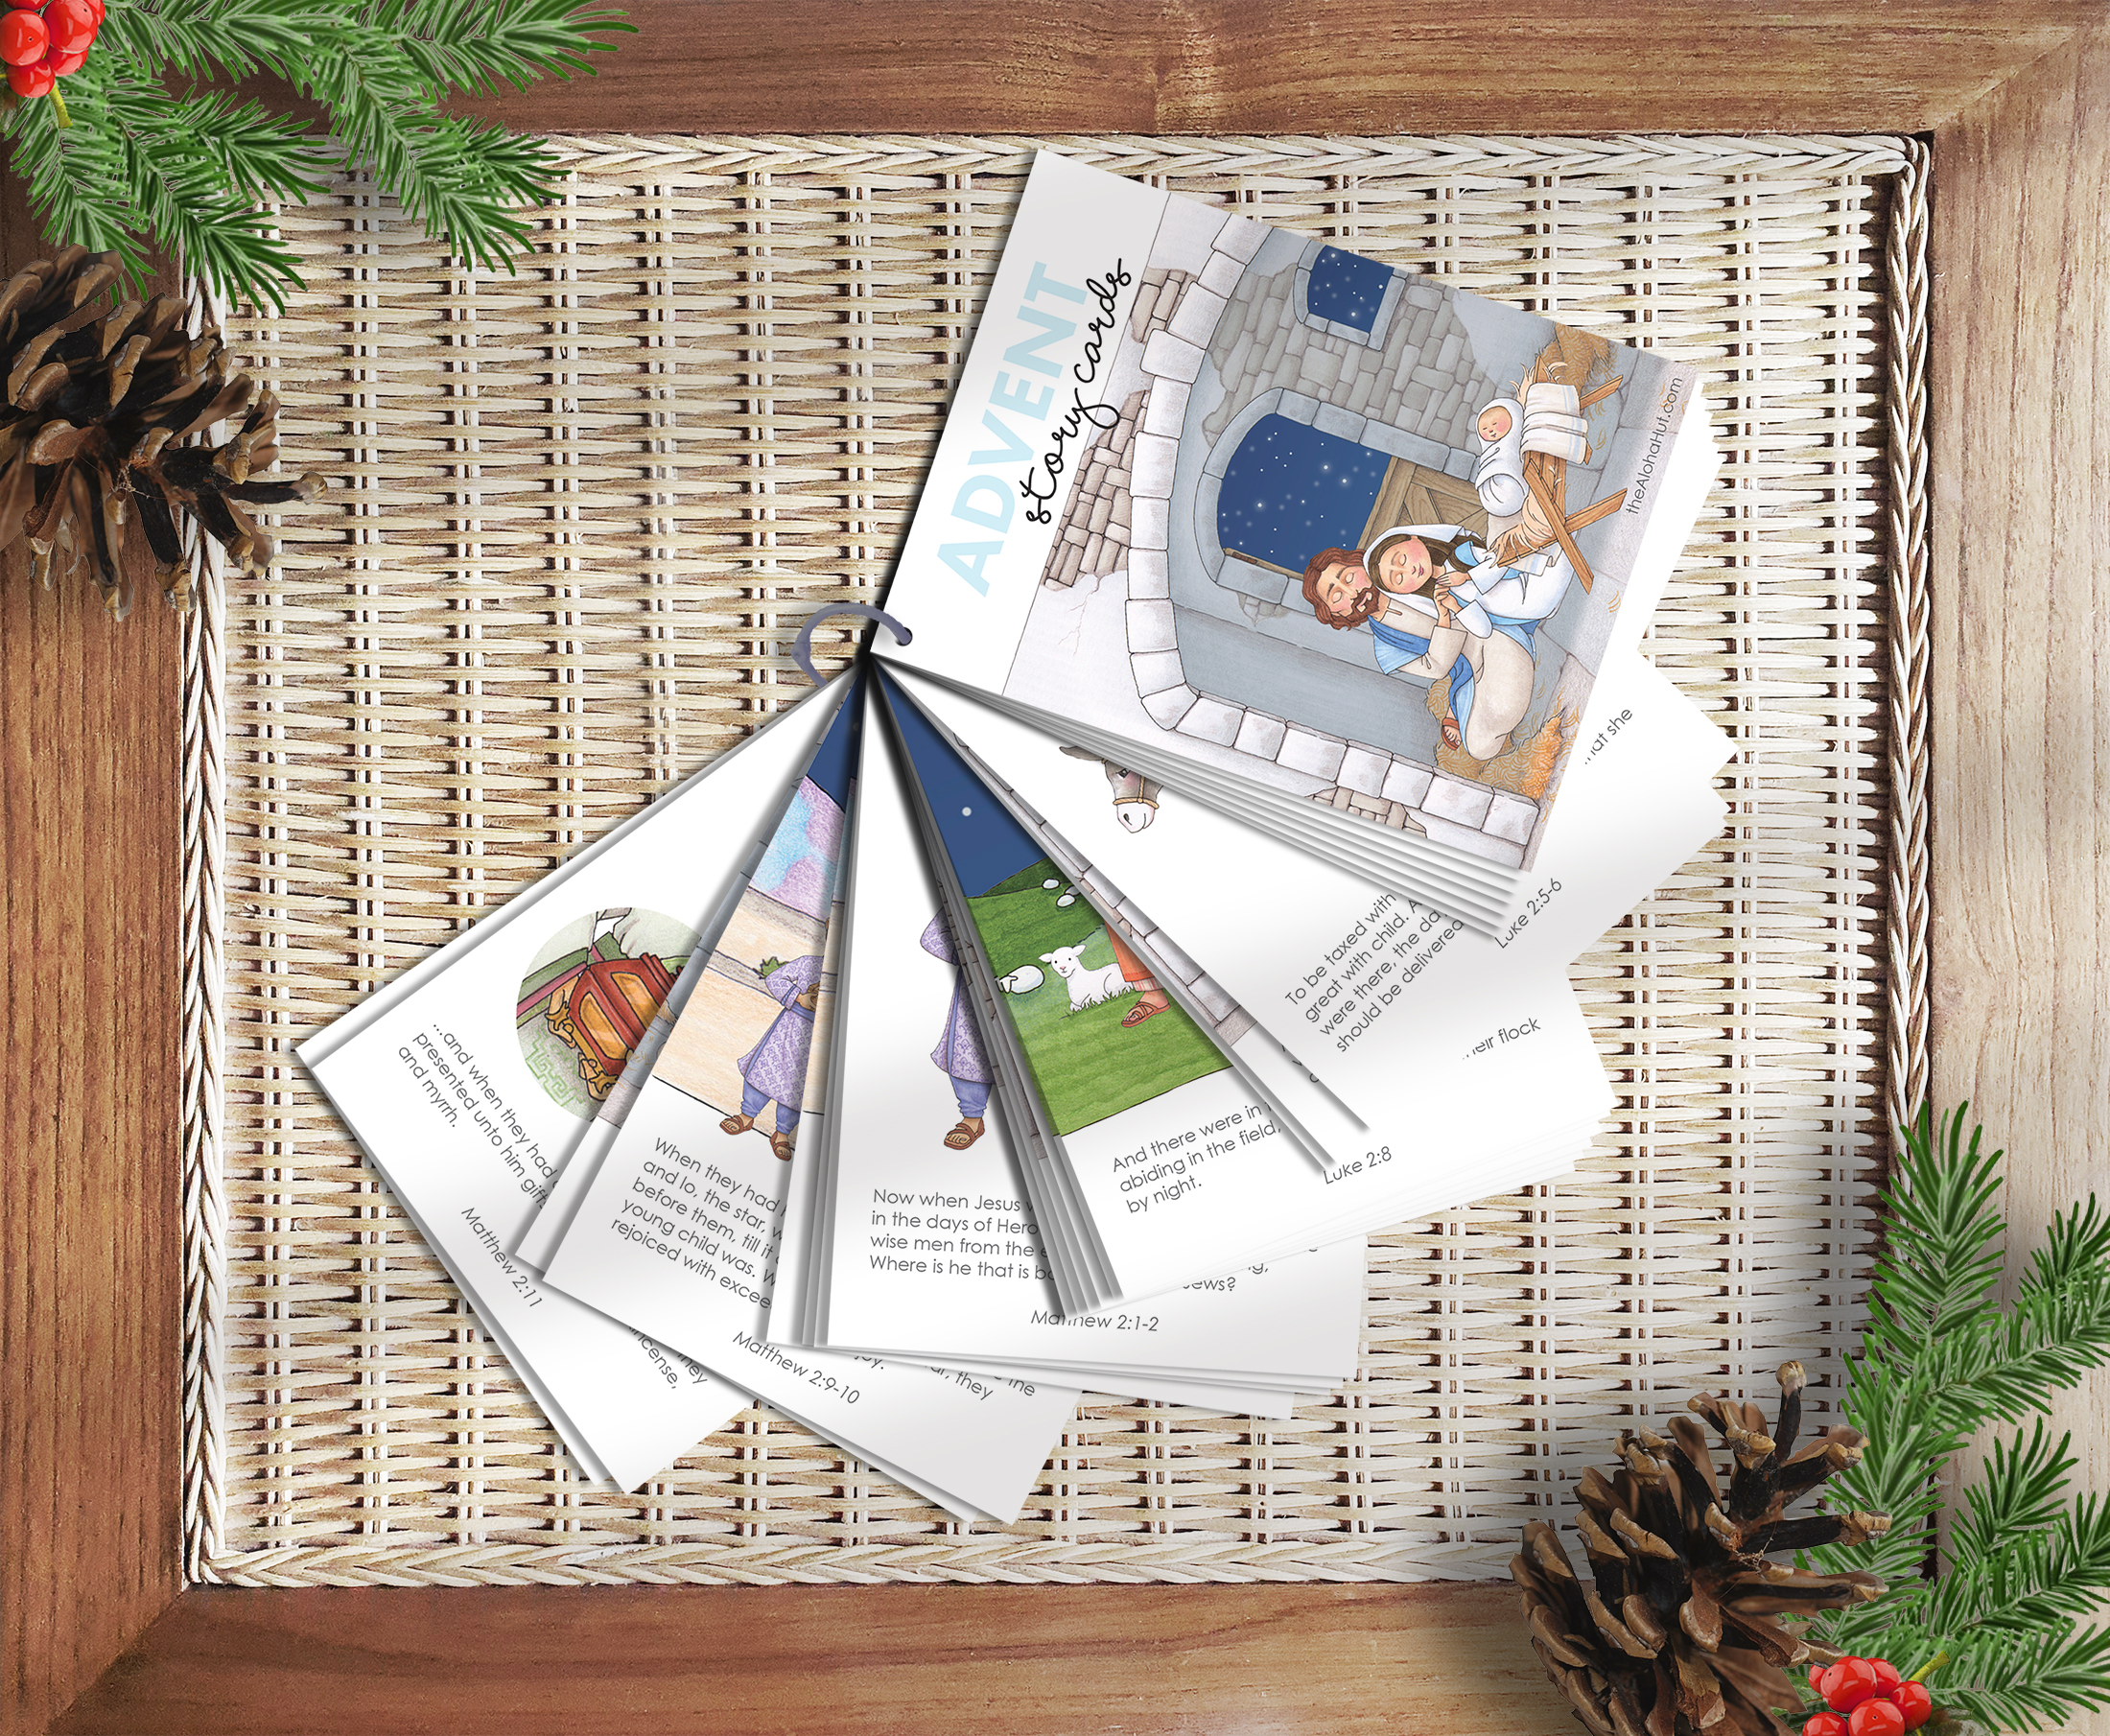 Christmas advent story cards. Download the printable advent story cards that have 25 pages about the birth of Jesus Christ. Print and teach kids the story of Jesus each day in December leading up to Christmas for a fun and easy nativity advent.